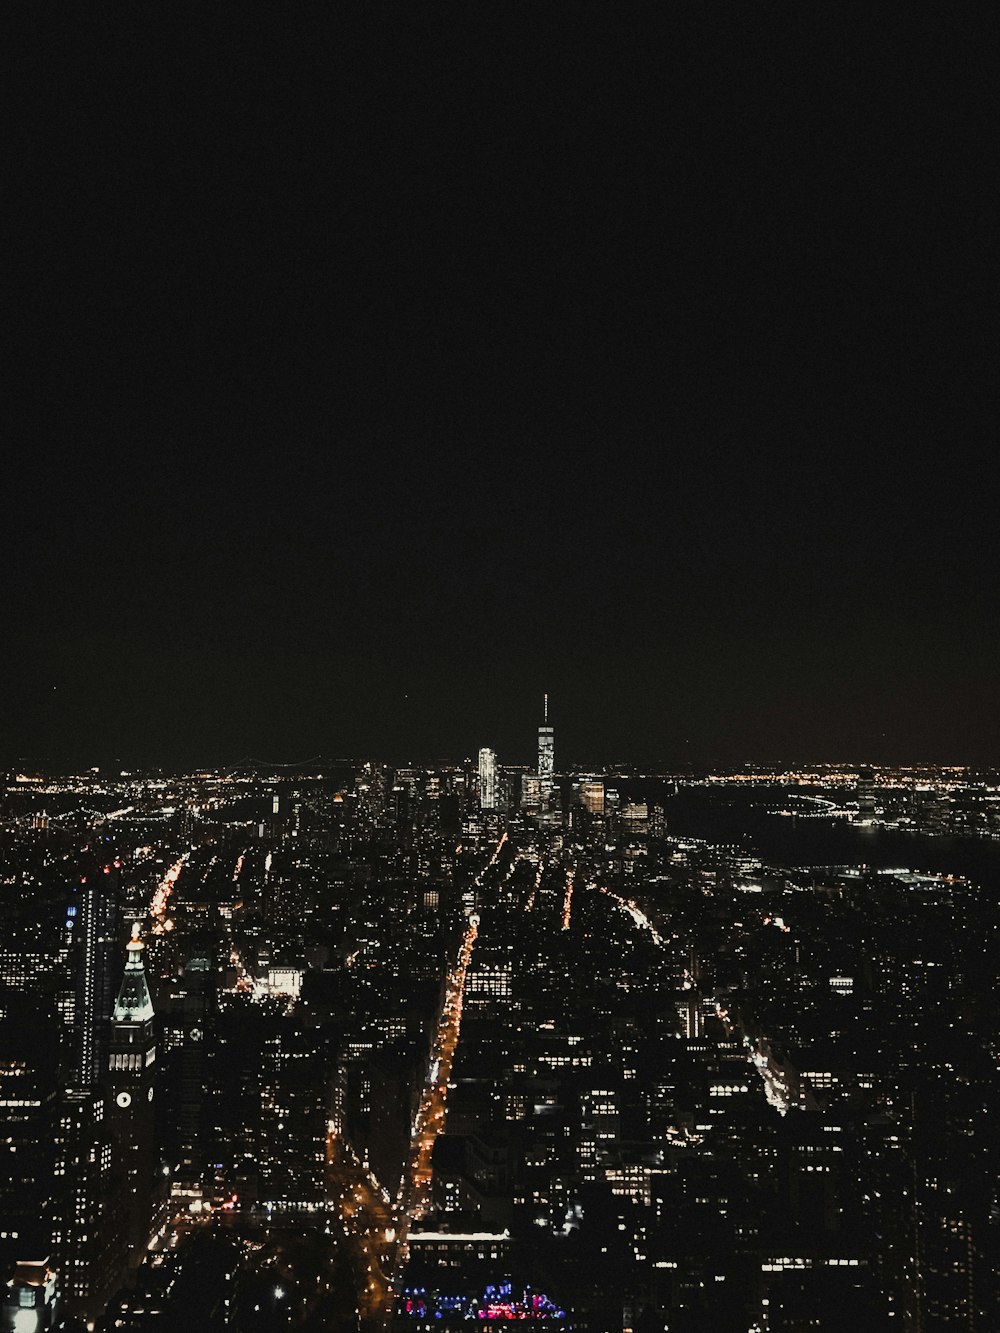 city lights during night time